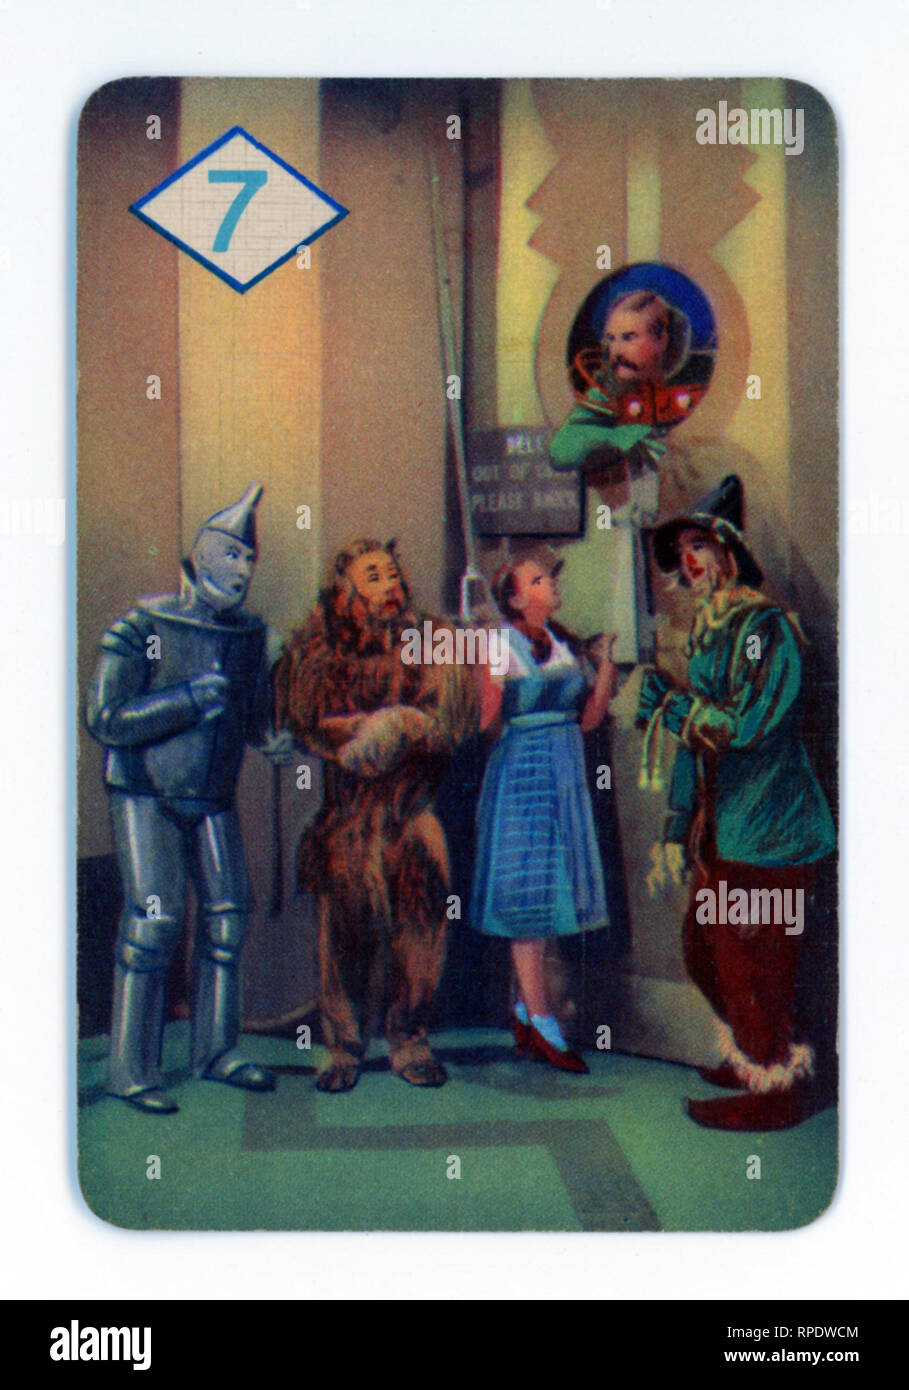 The Wizard of Oz card game produced in London in 1940 by Castell Brothers, Ltd. (Pepys brand) to coincide with the launch of the M.G.M. film in the UK in that year Stock Photo